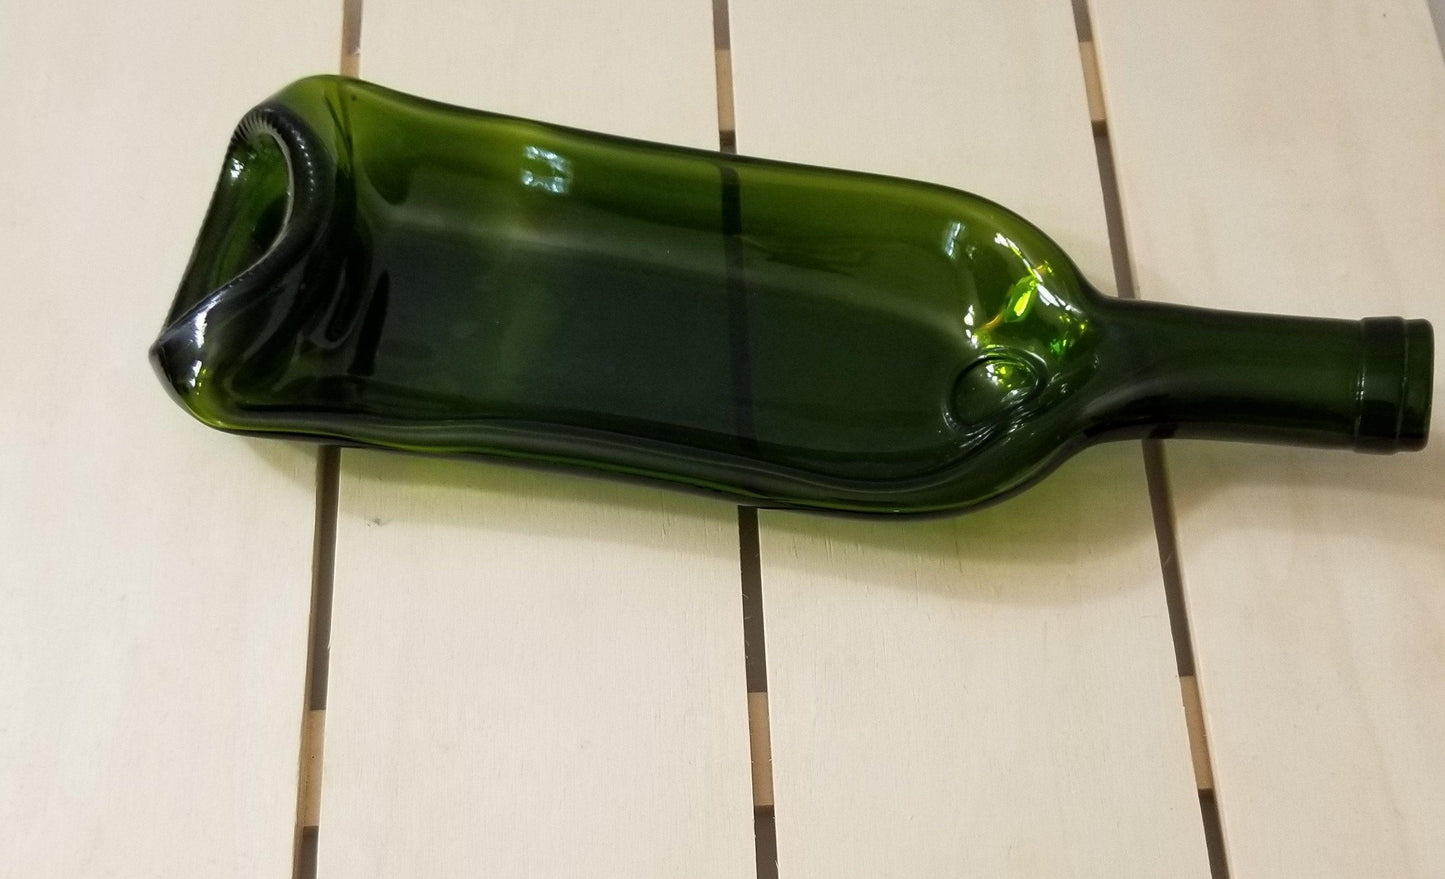 Recycled and upcycled Green slumped wine bottle, deep slump bowl type by Seeds glassworks, Seedsglasworks 